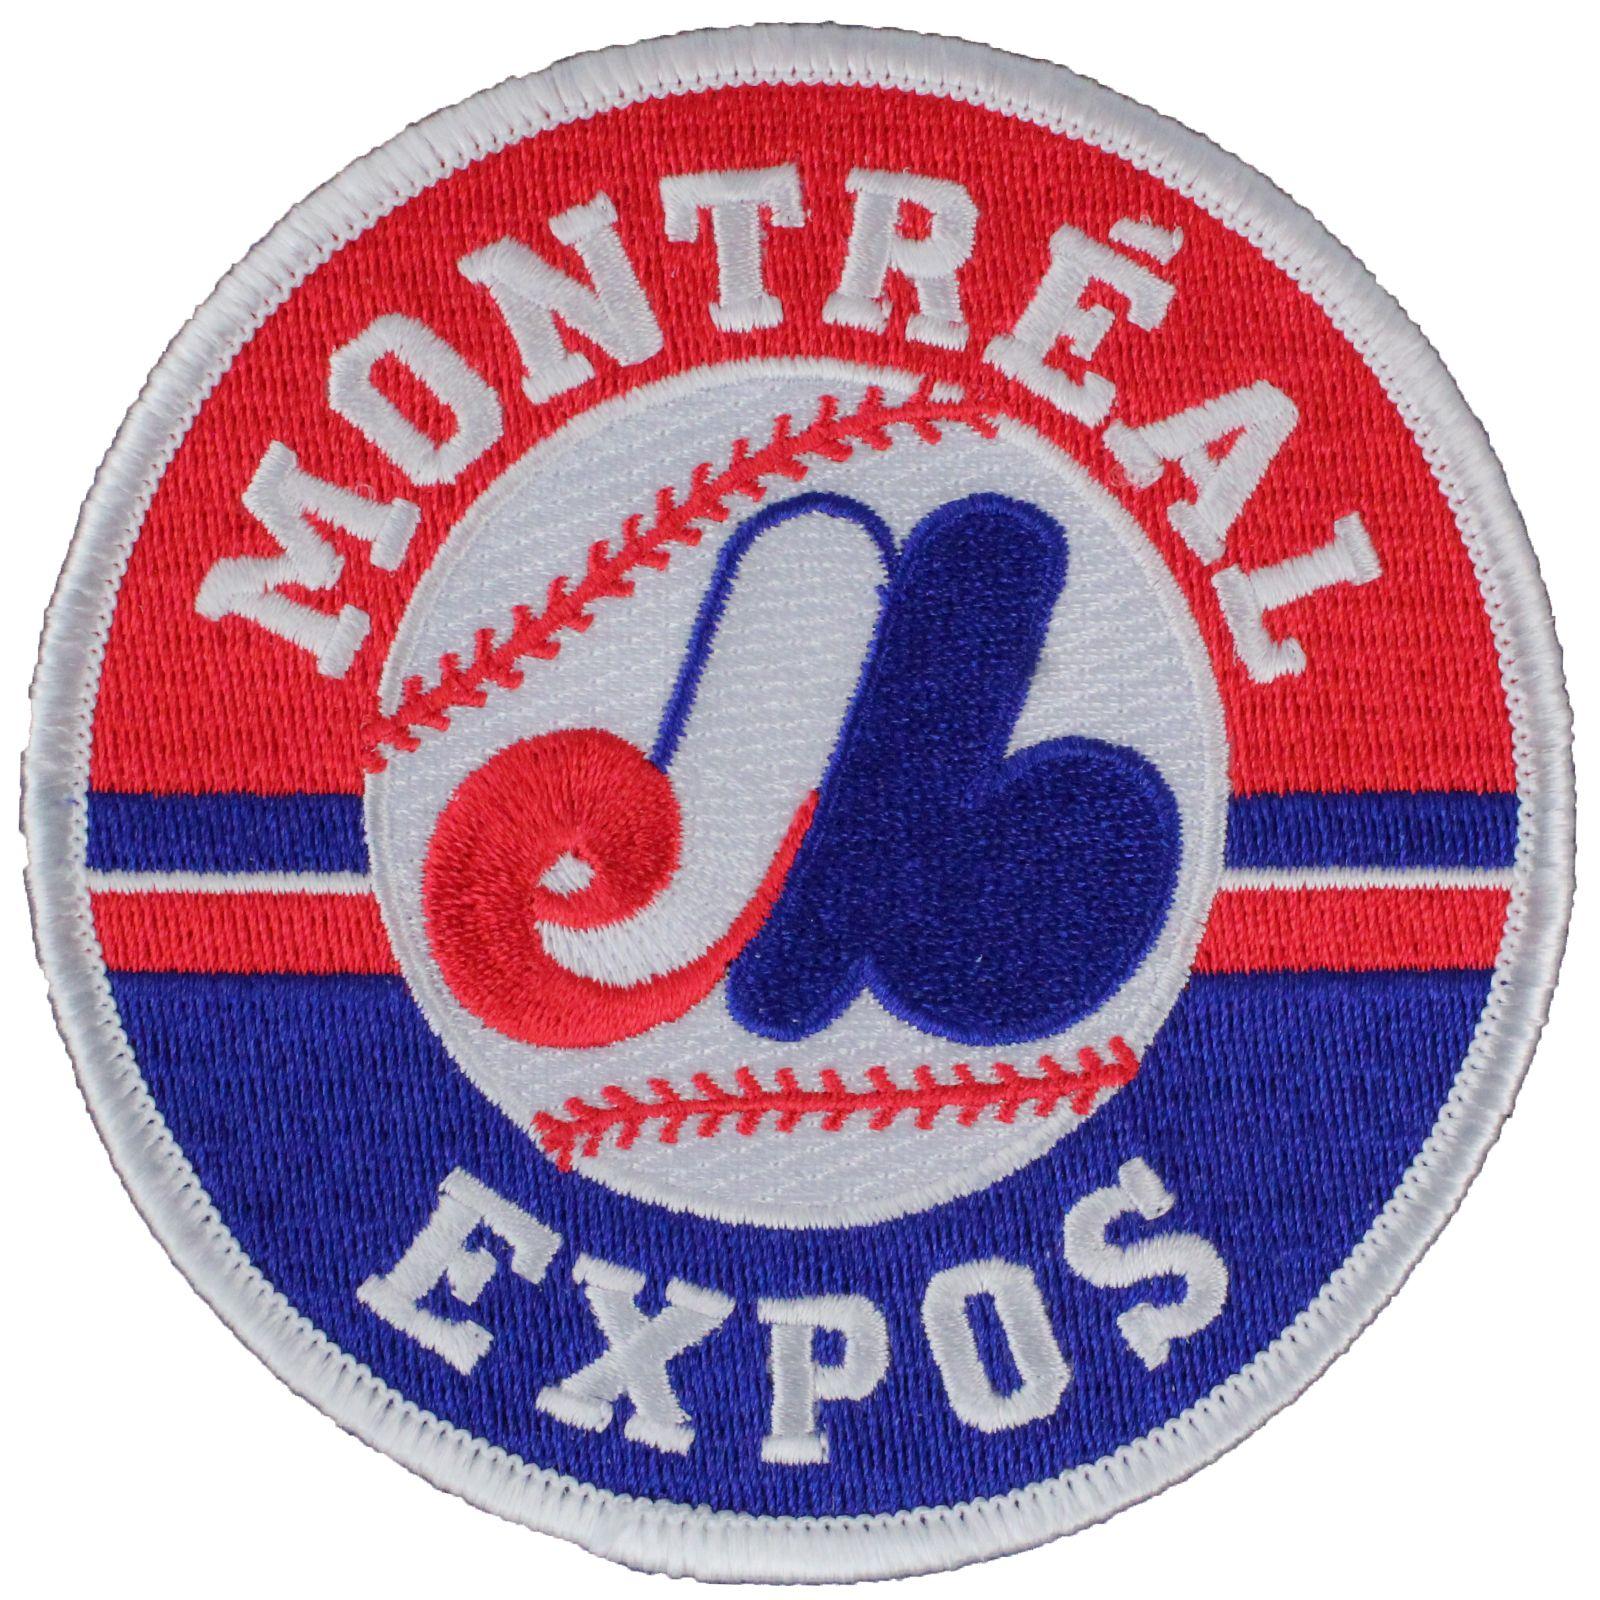 Expos Logo - Details about Montreal Expos Primary Team Logo Round Official MLB Jersey  Sleeve Baseball Patch